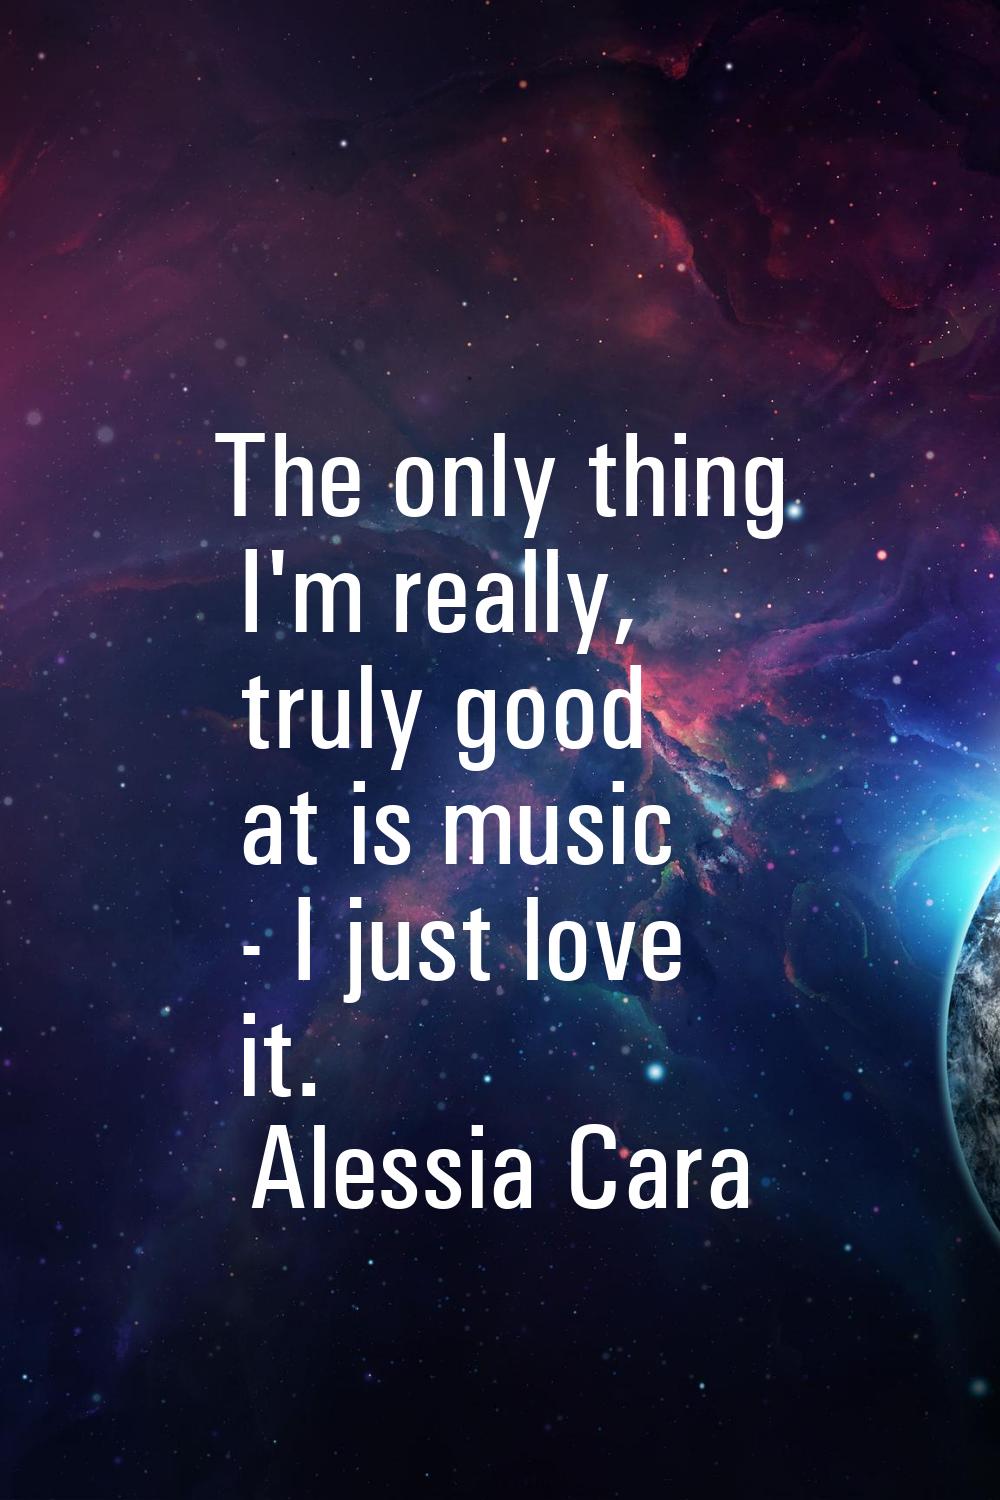 The only thing I'm really, truly good at is music - I just love it.